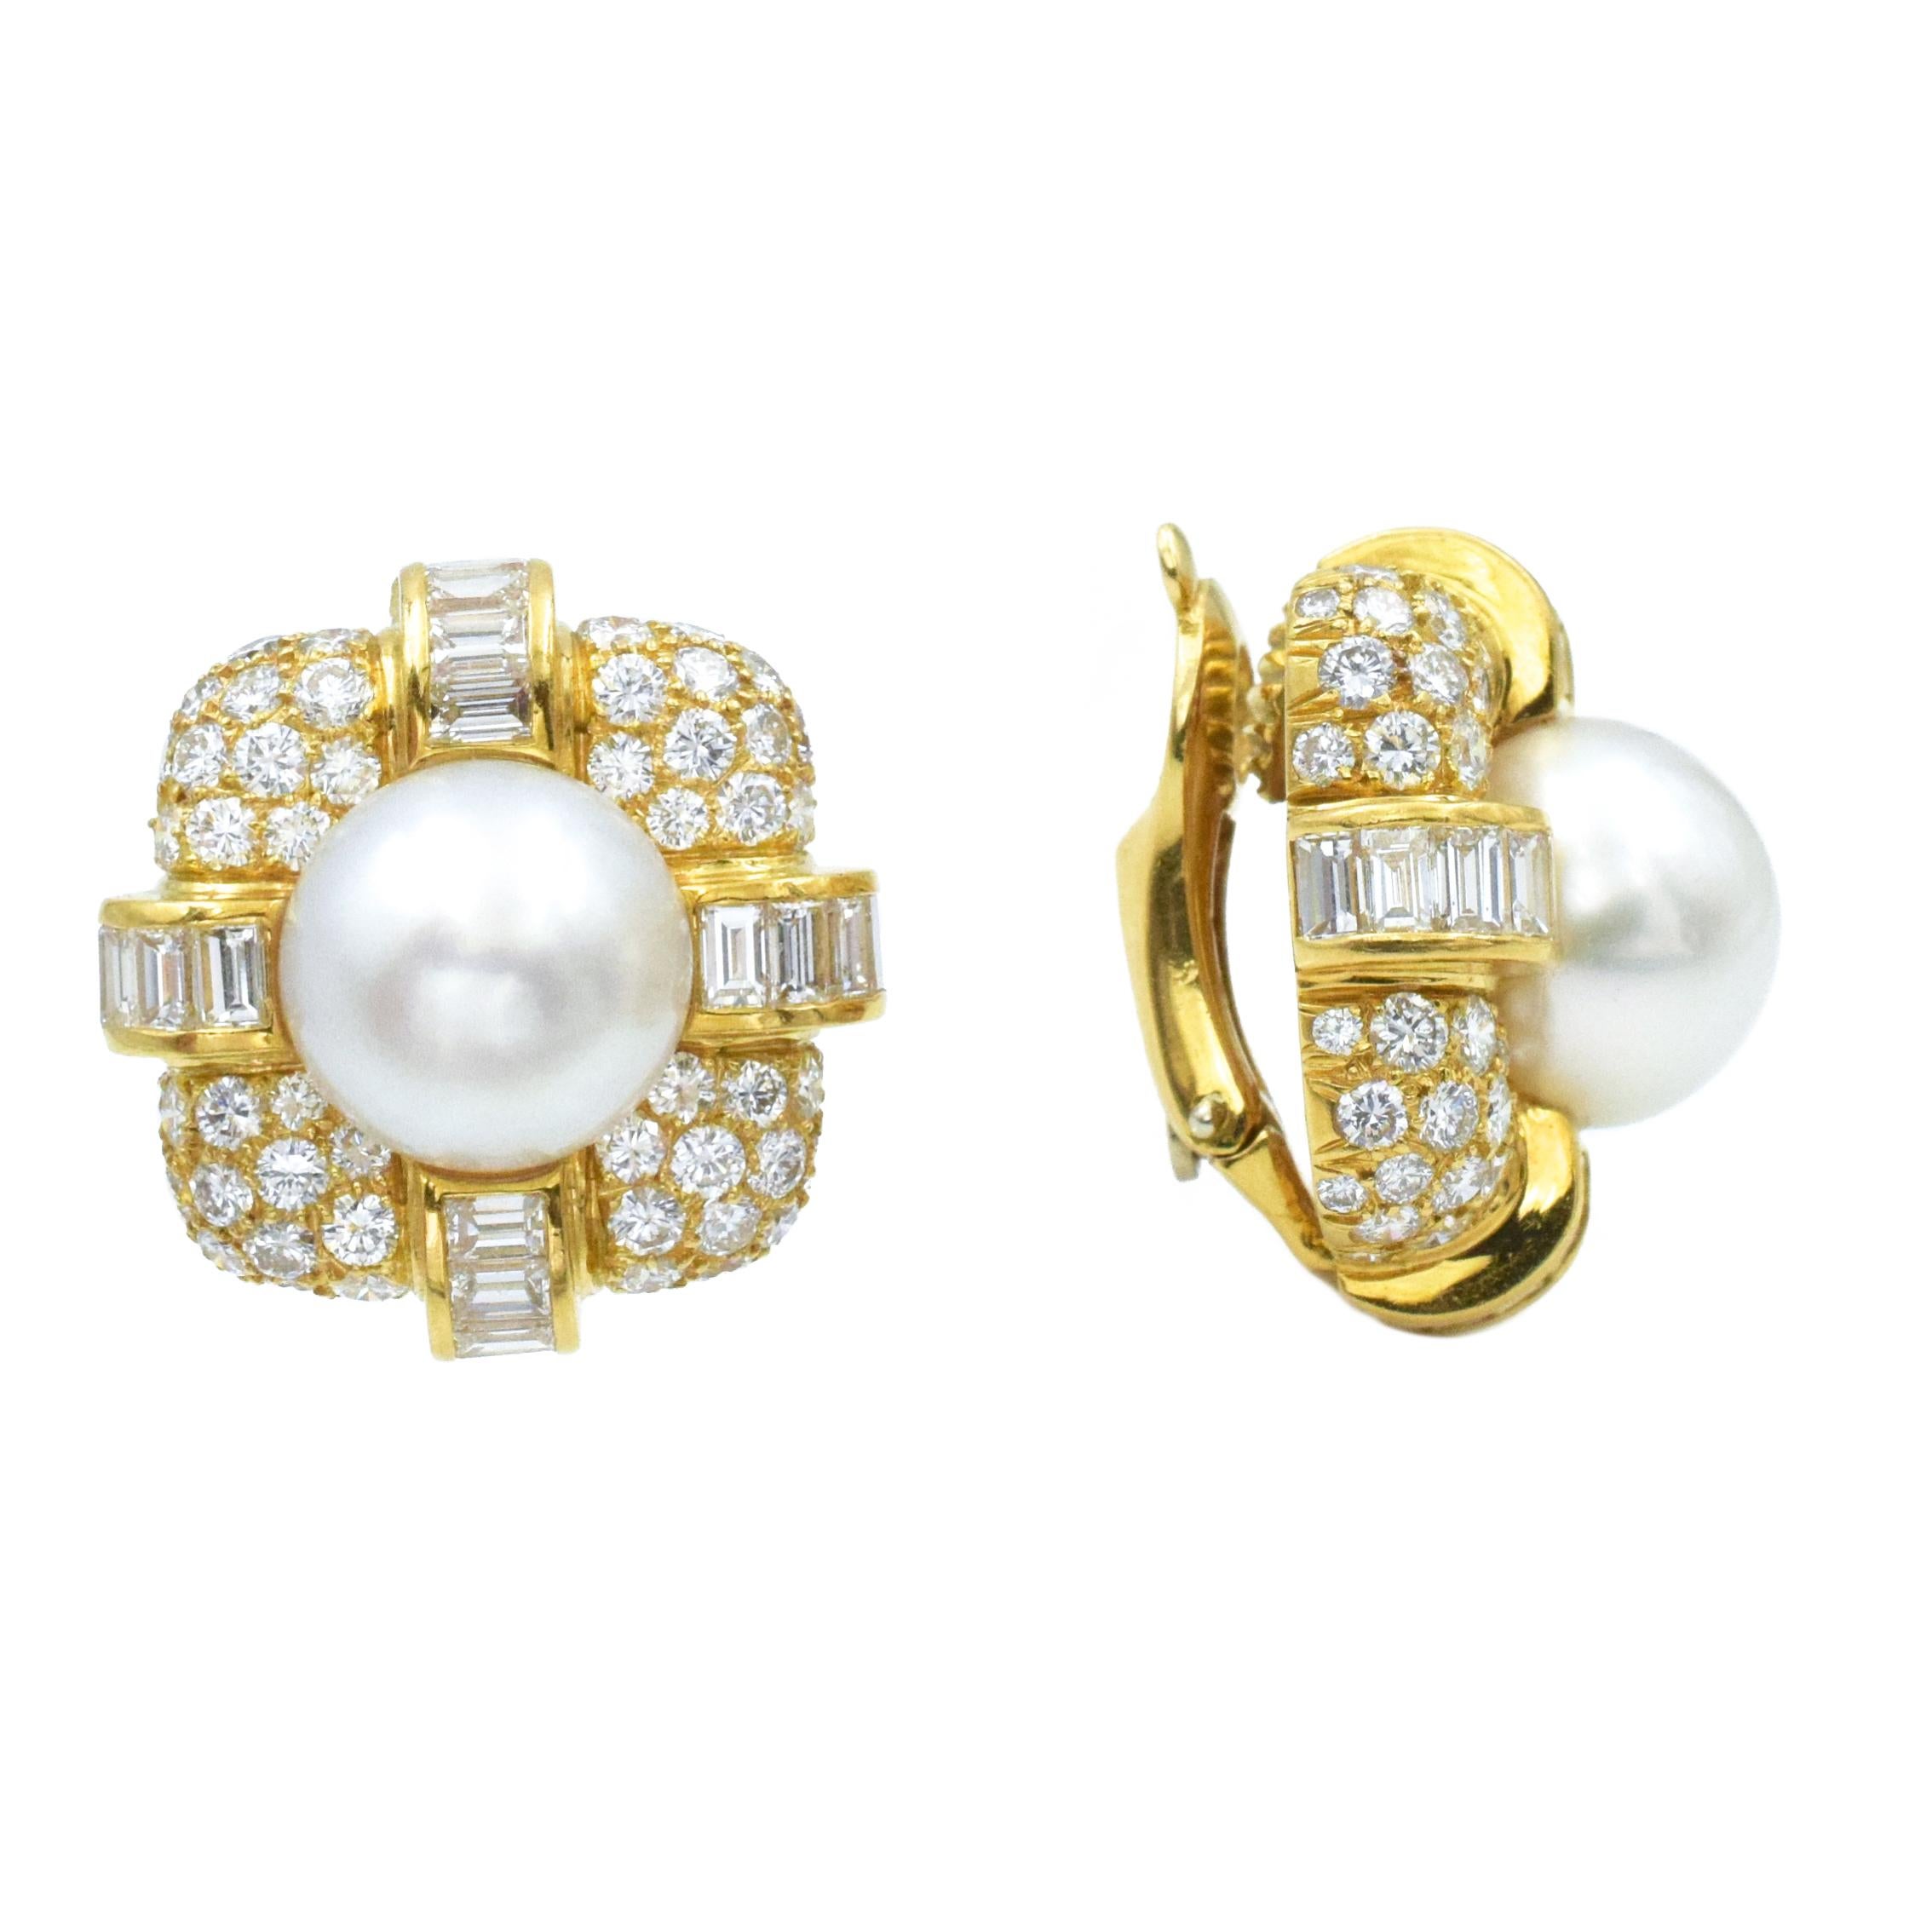 Round Cut Van Cleef & Arpels South Sea Cultured Pearl and Diamond Ear-Clips